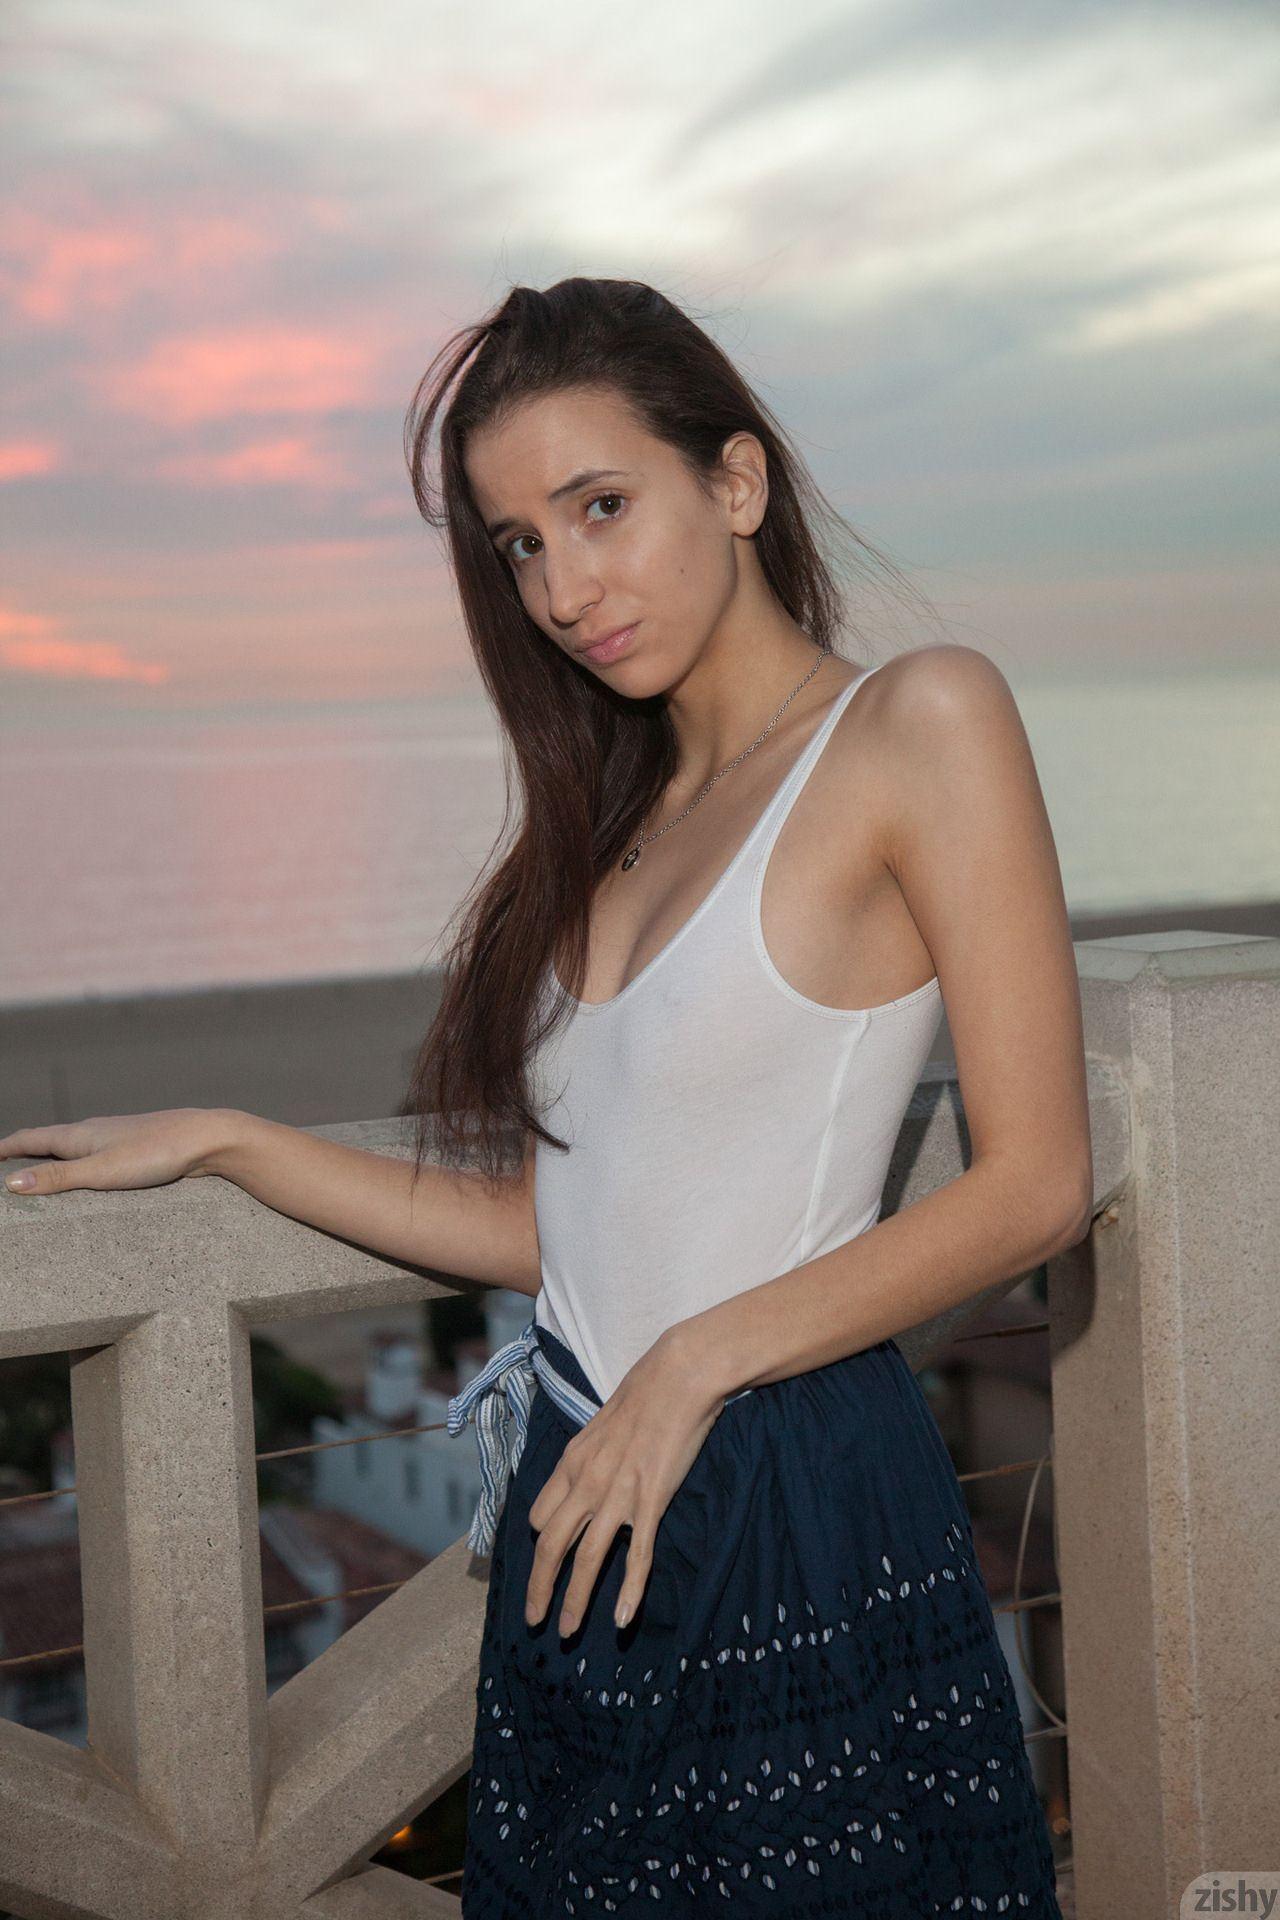 Teen sensation Belle Knox shows you what's up her skirt #53437945